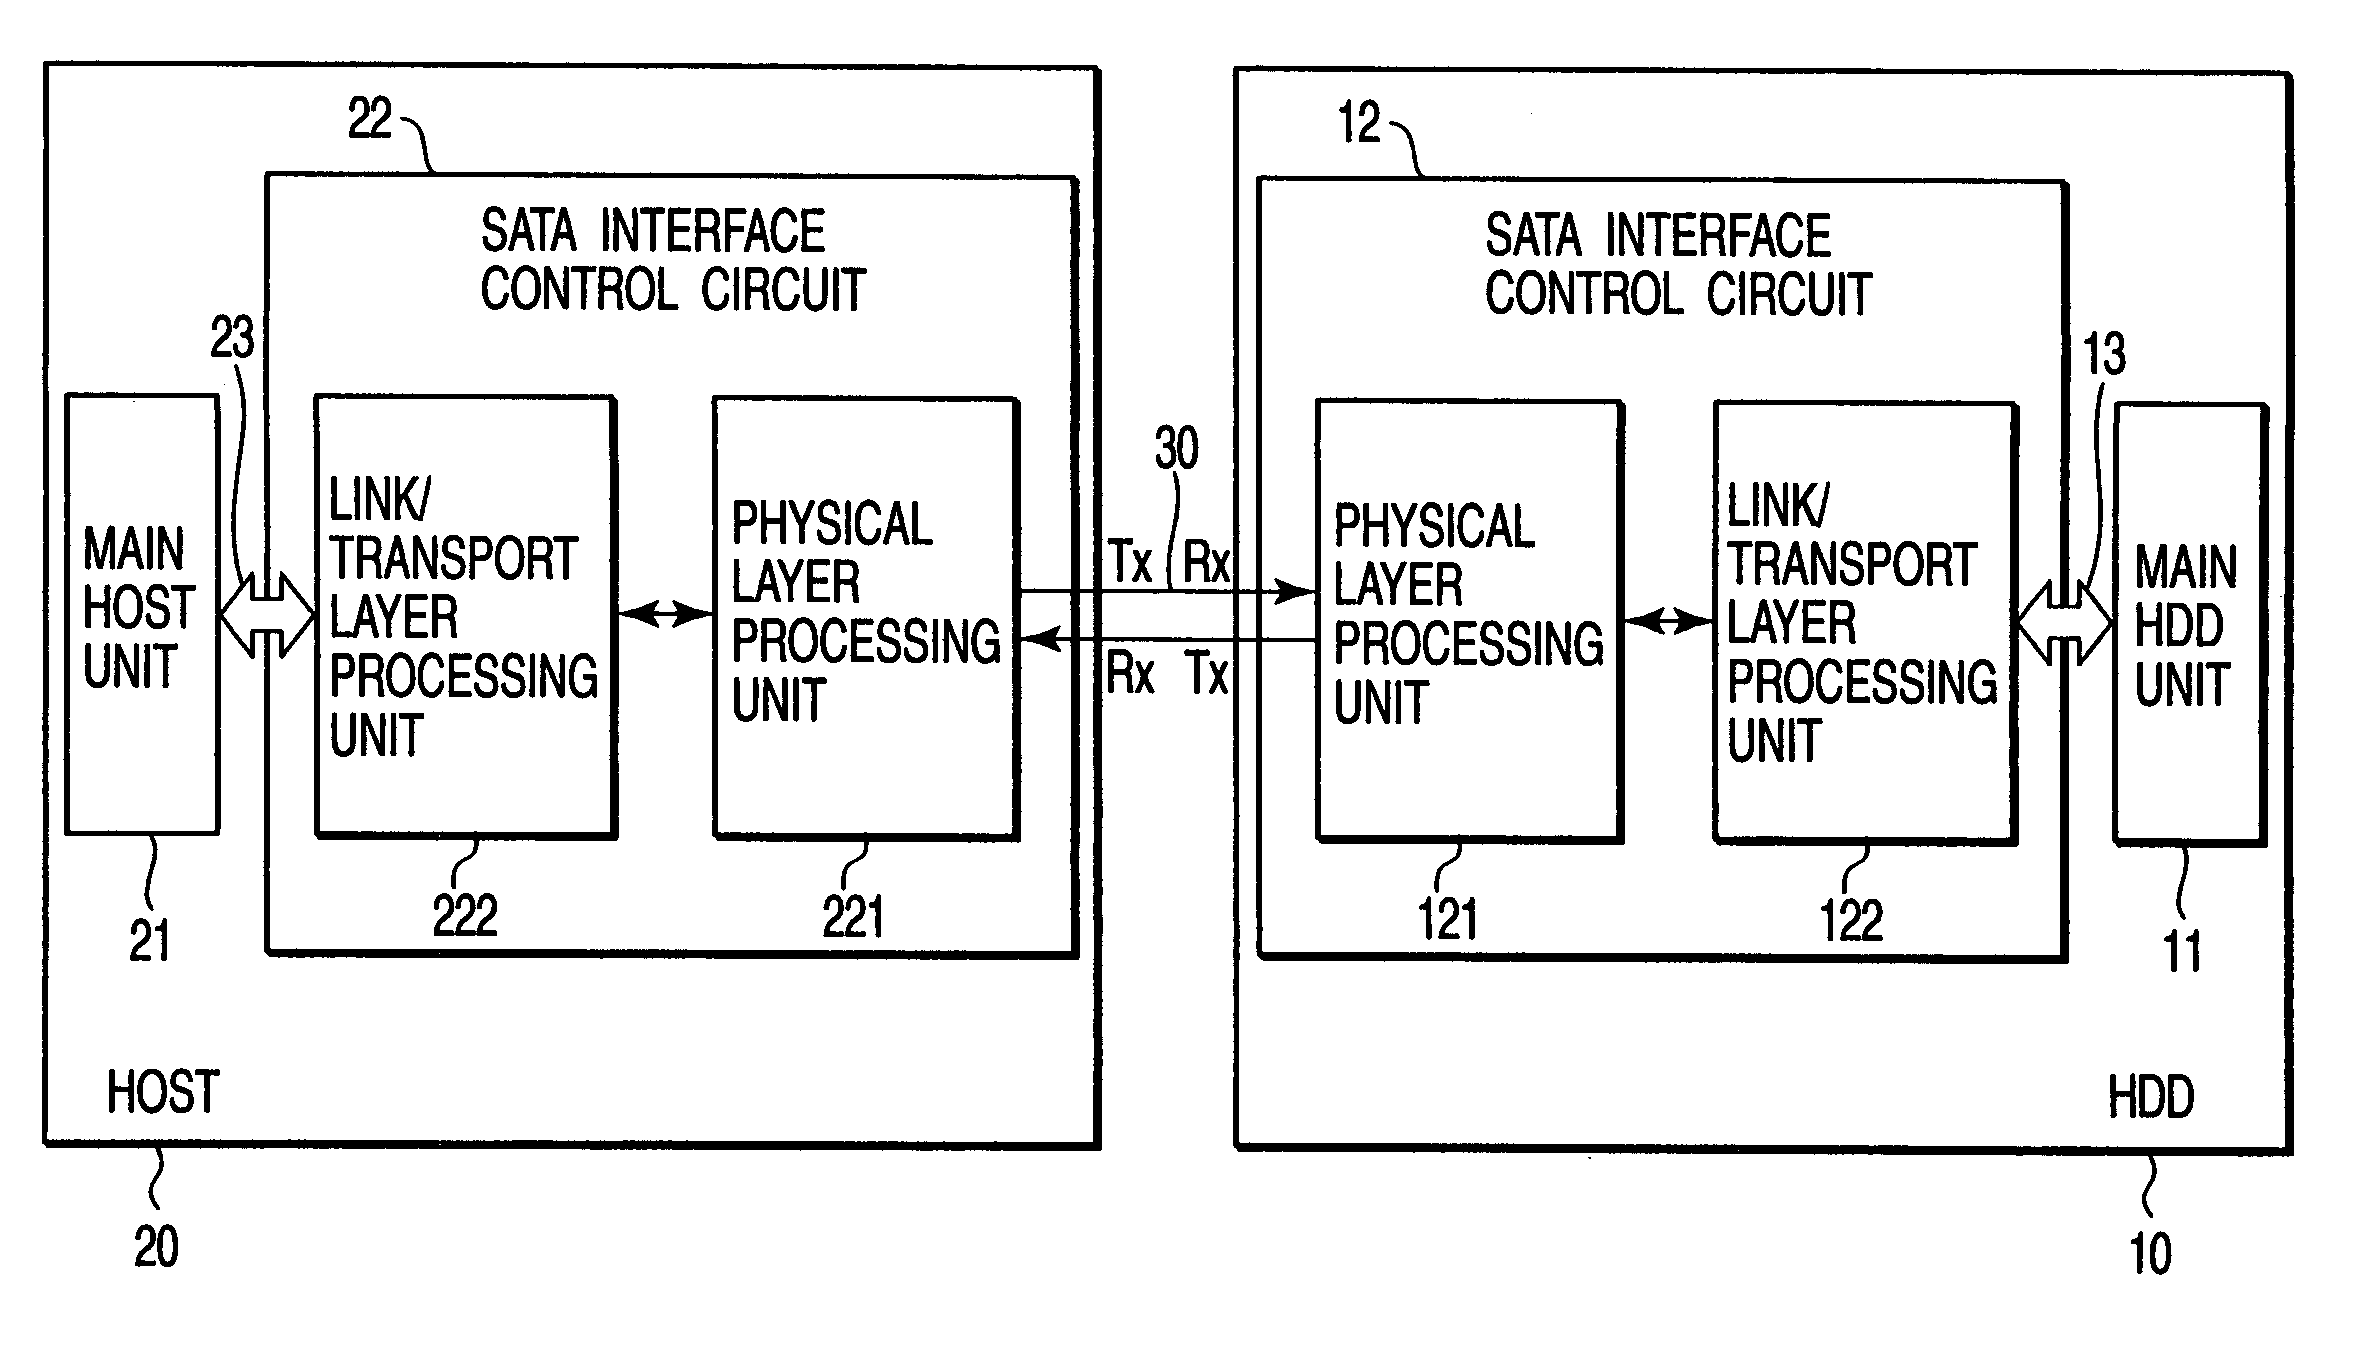 Apparatus and method for saving power in a disk drive with a serial ATA interface connected to a host via a serial ATA bus